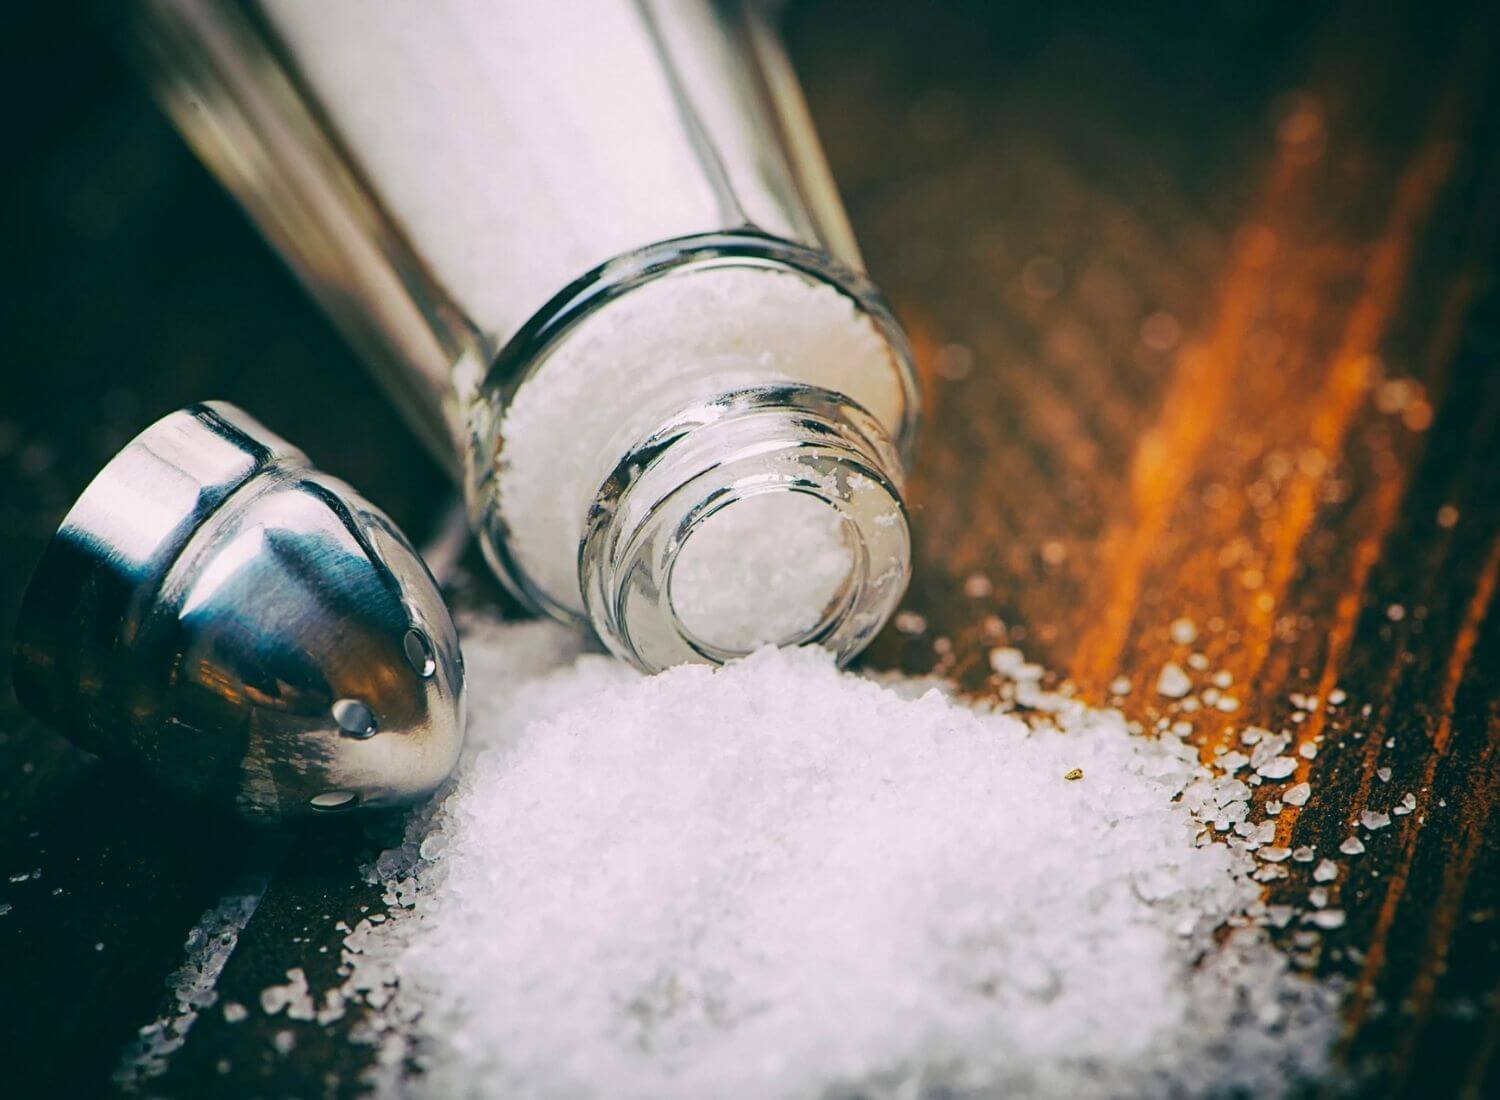 Low Sodium Salt Substitutes: Are They Healthy Enough?